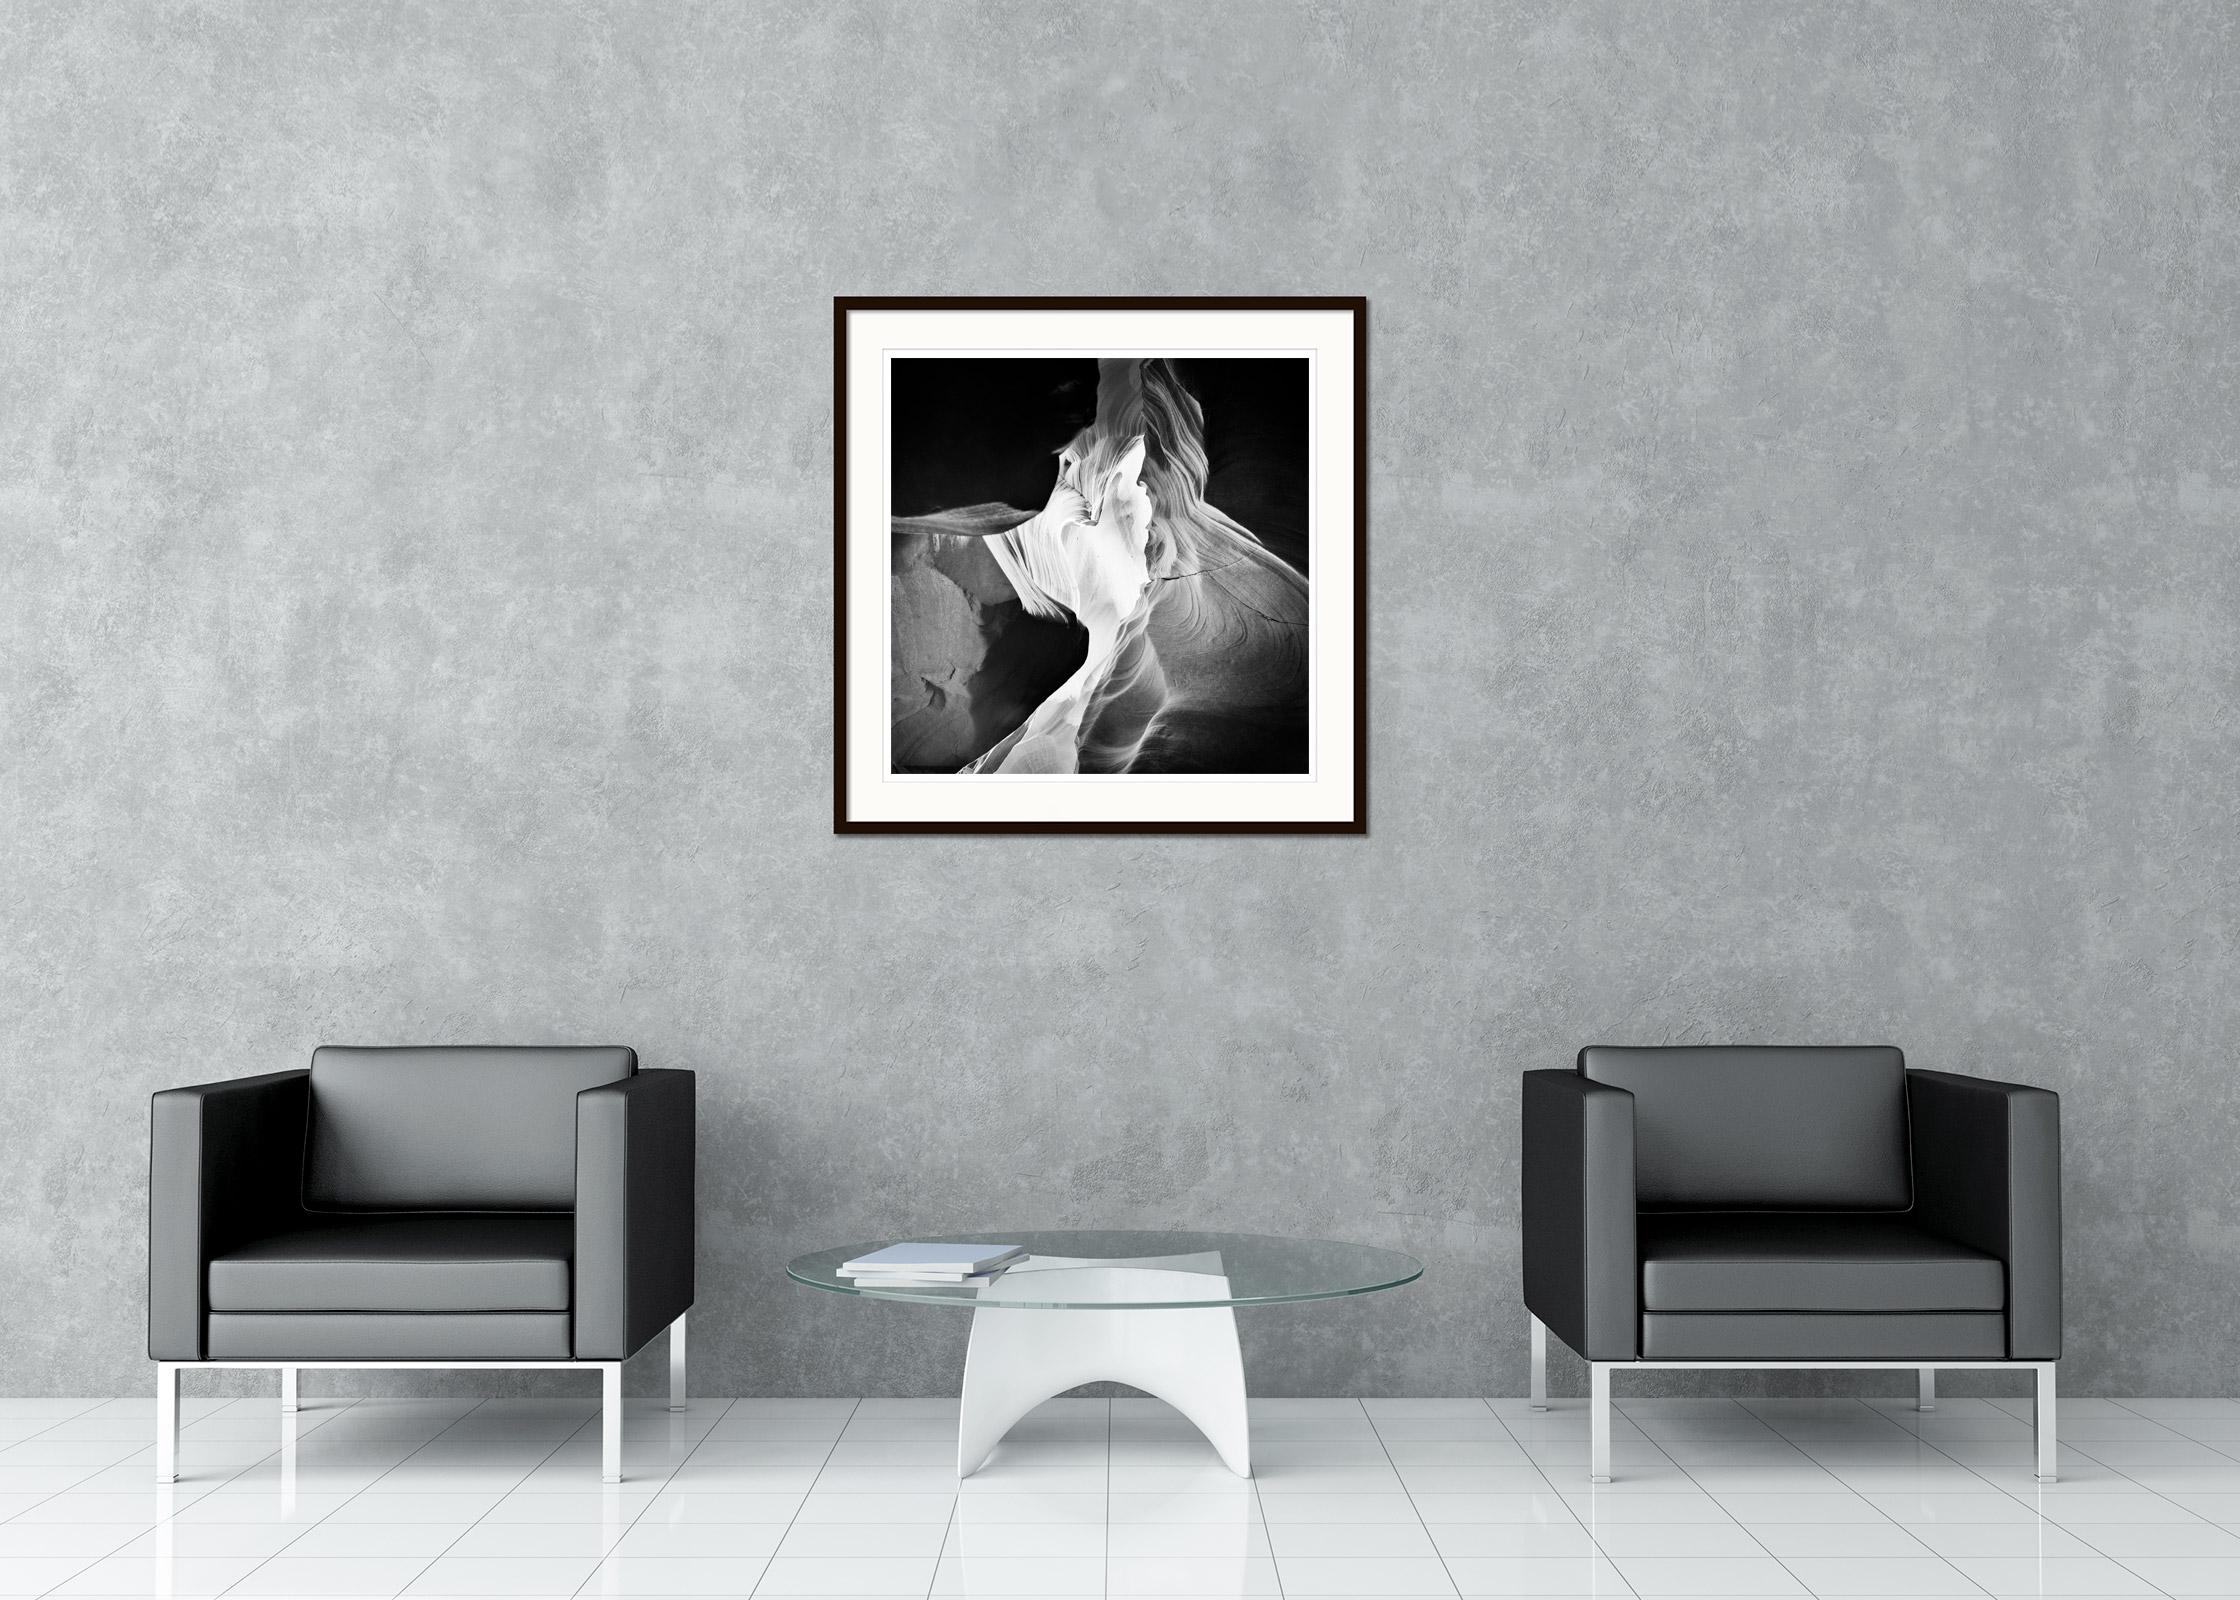 Black and white fine art landscape photography. Antelope Canyon sandstone formation detail, Page, Arizona, USA. Archival pigment ink print as part of a limited edition of 9. All Gerald Berghammer prints are made to order in limited editions on